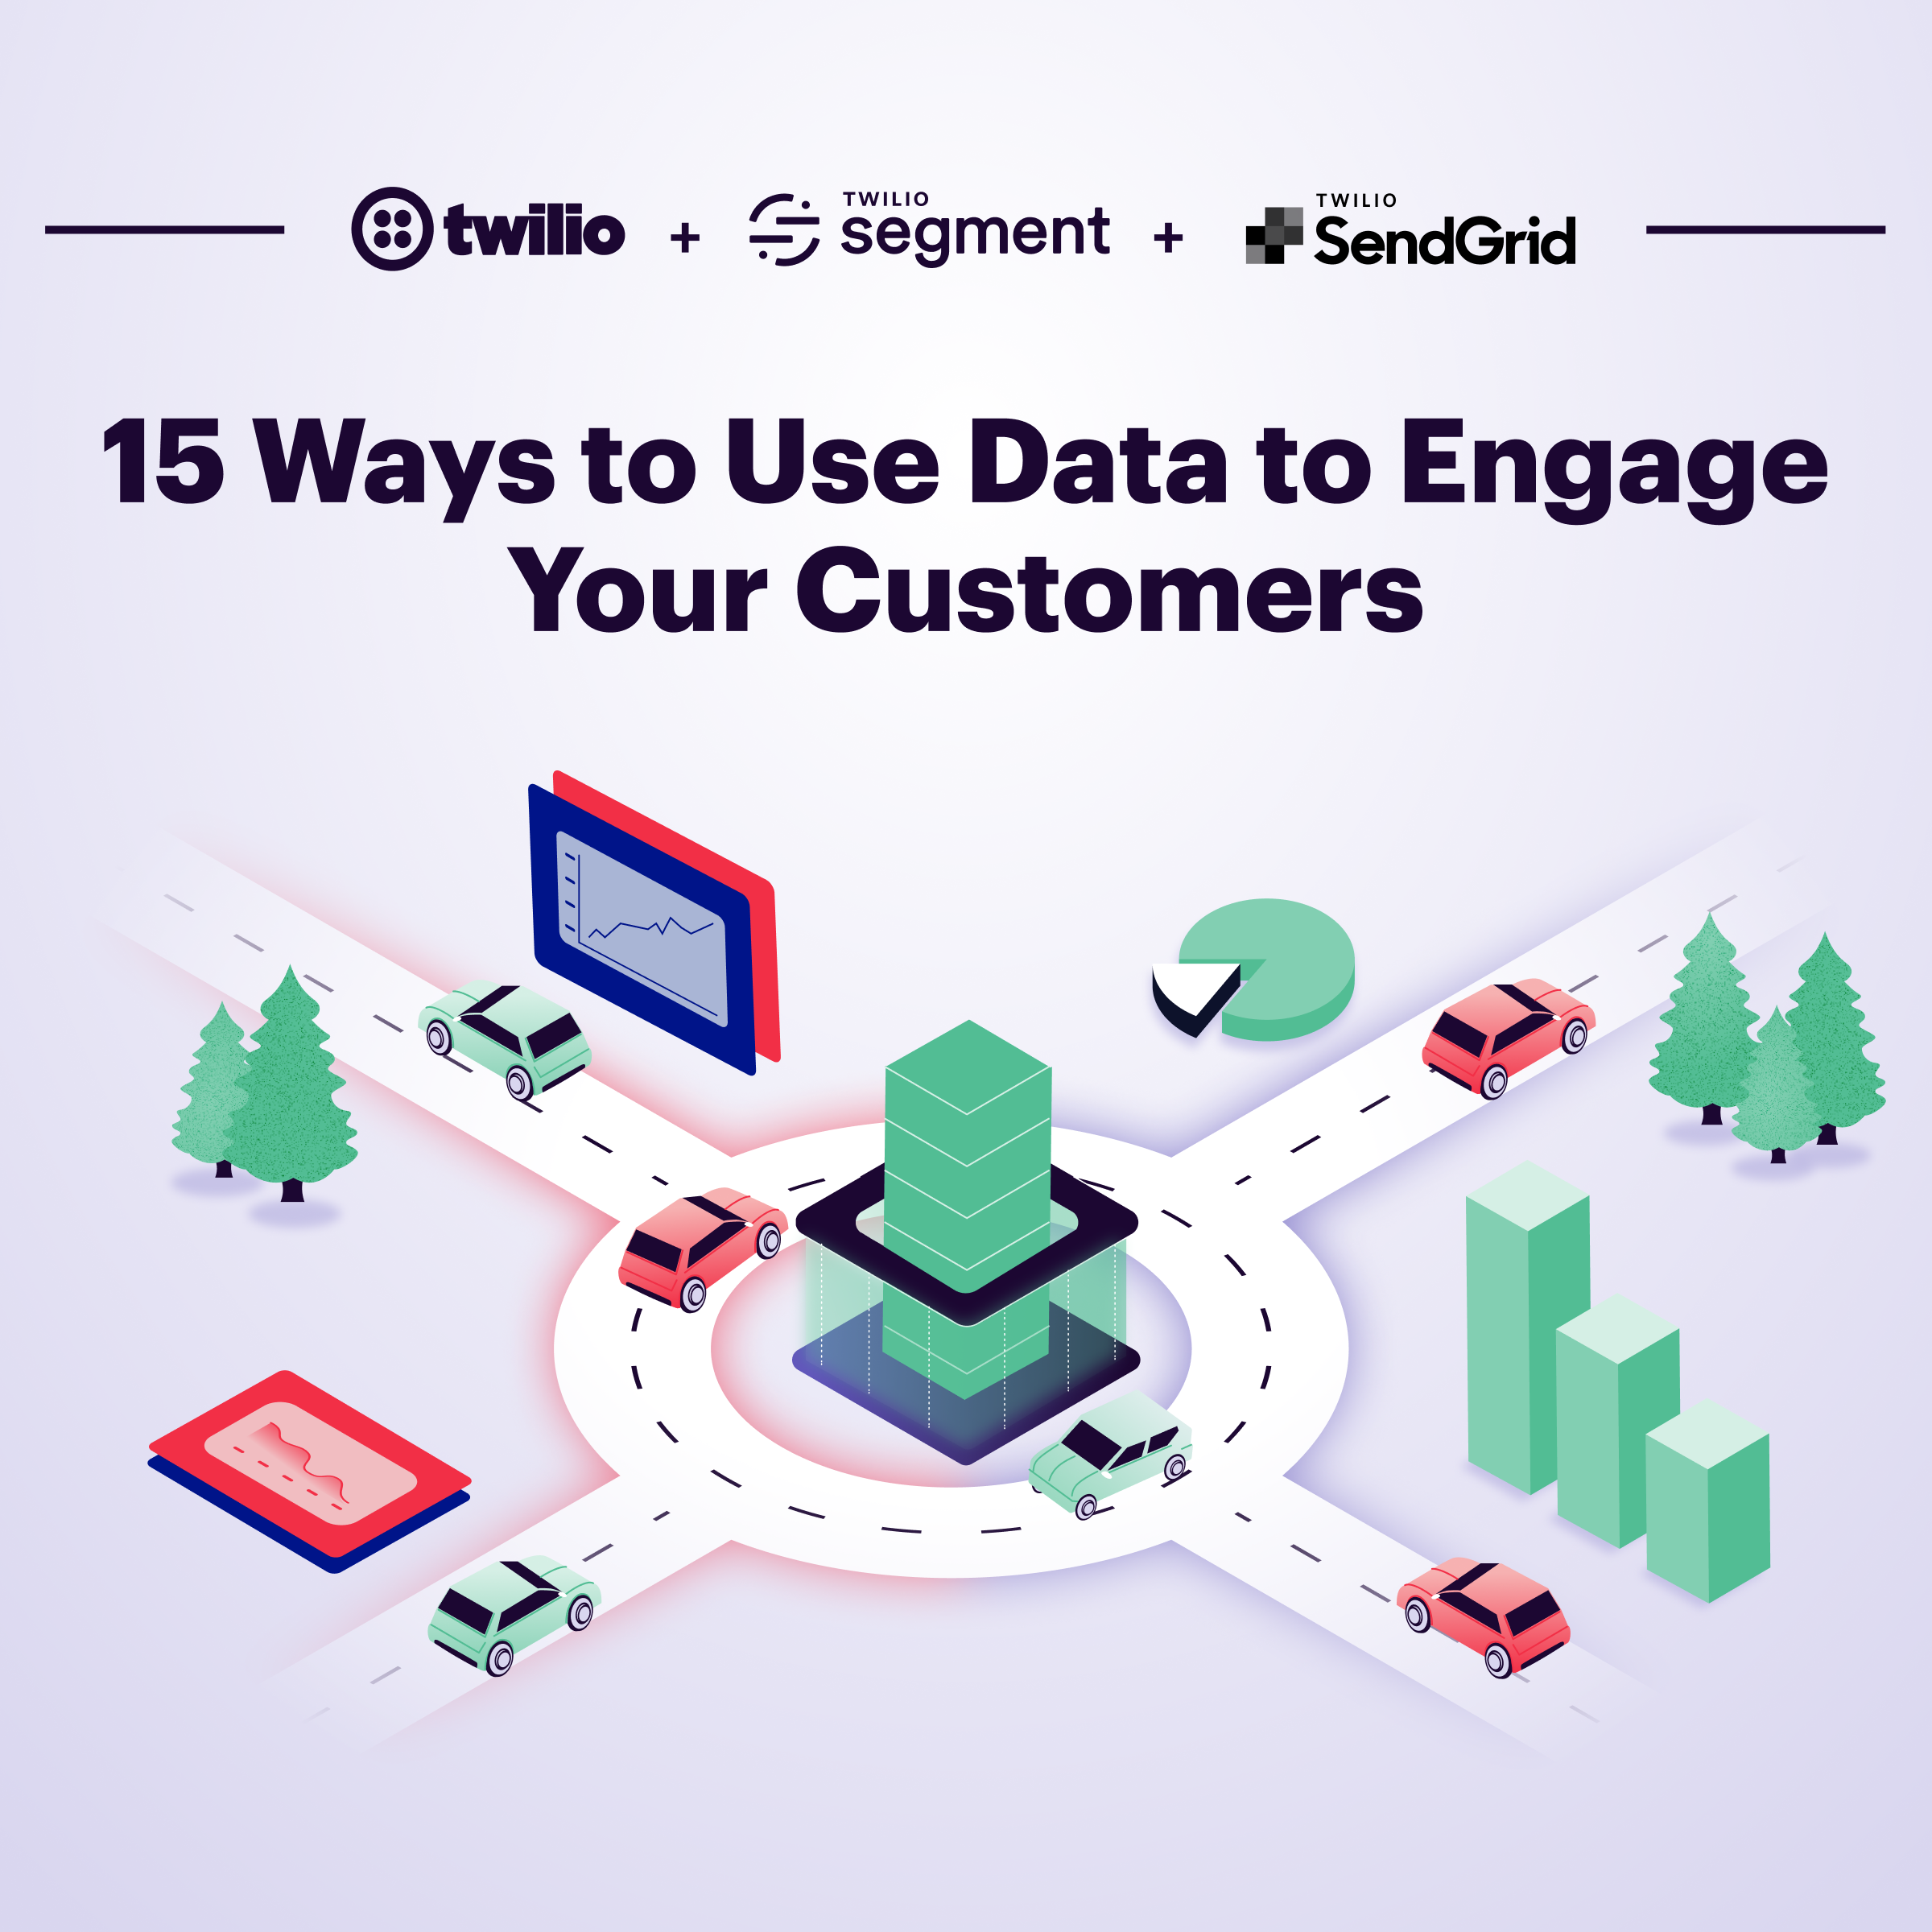 15 ways to use data to engage your customers